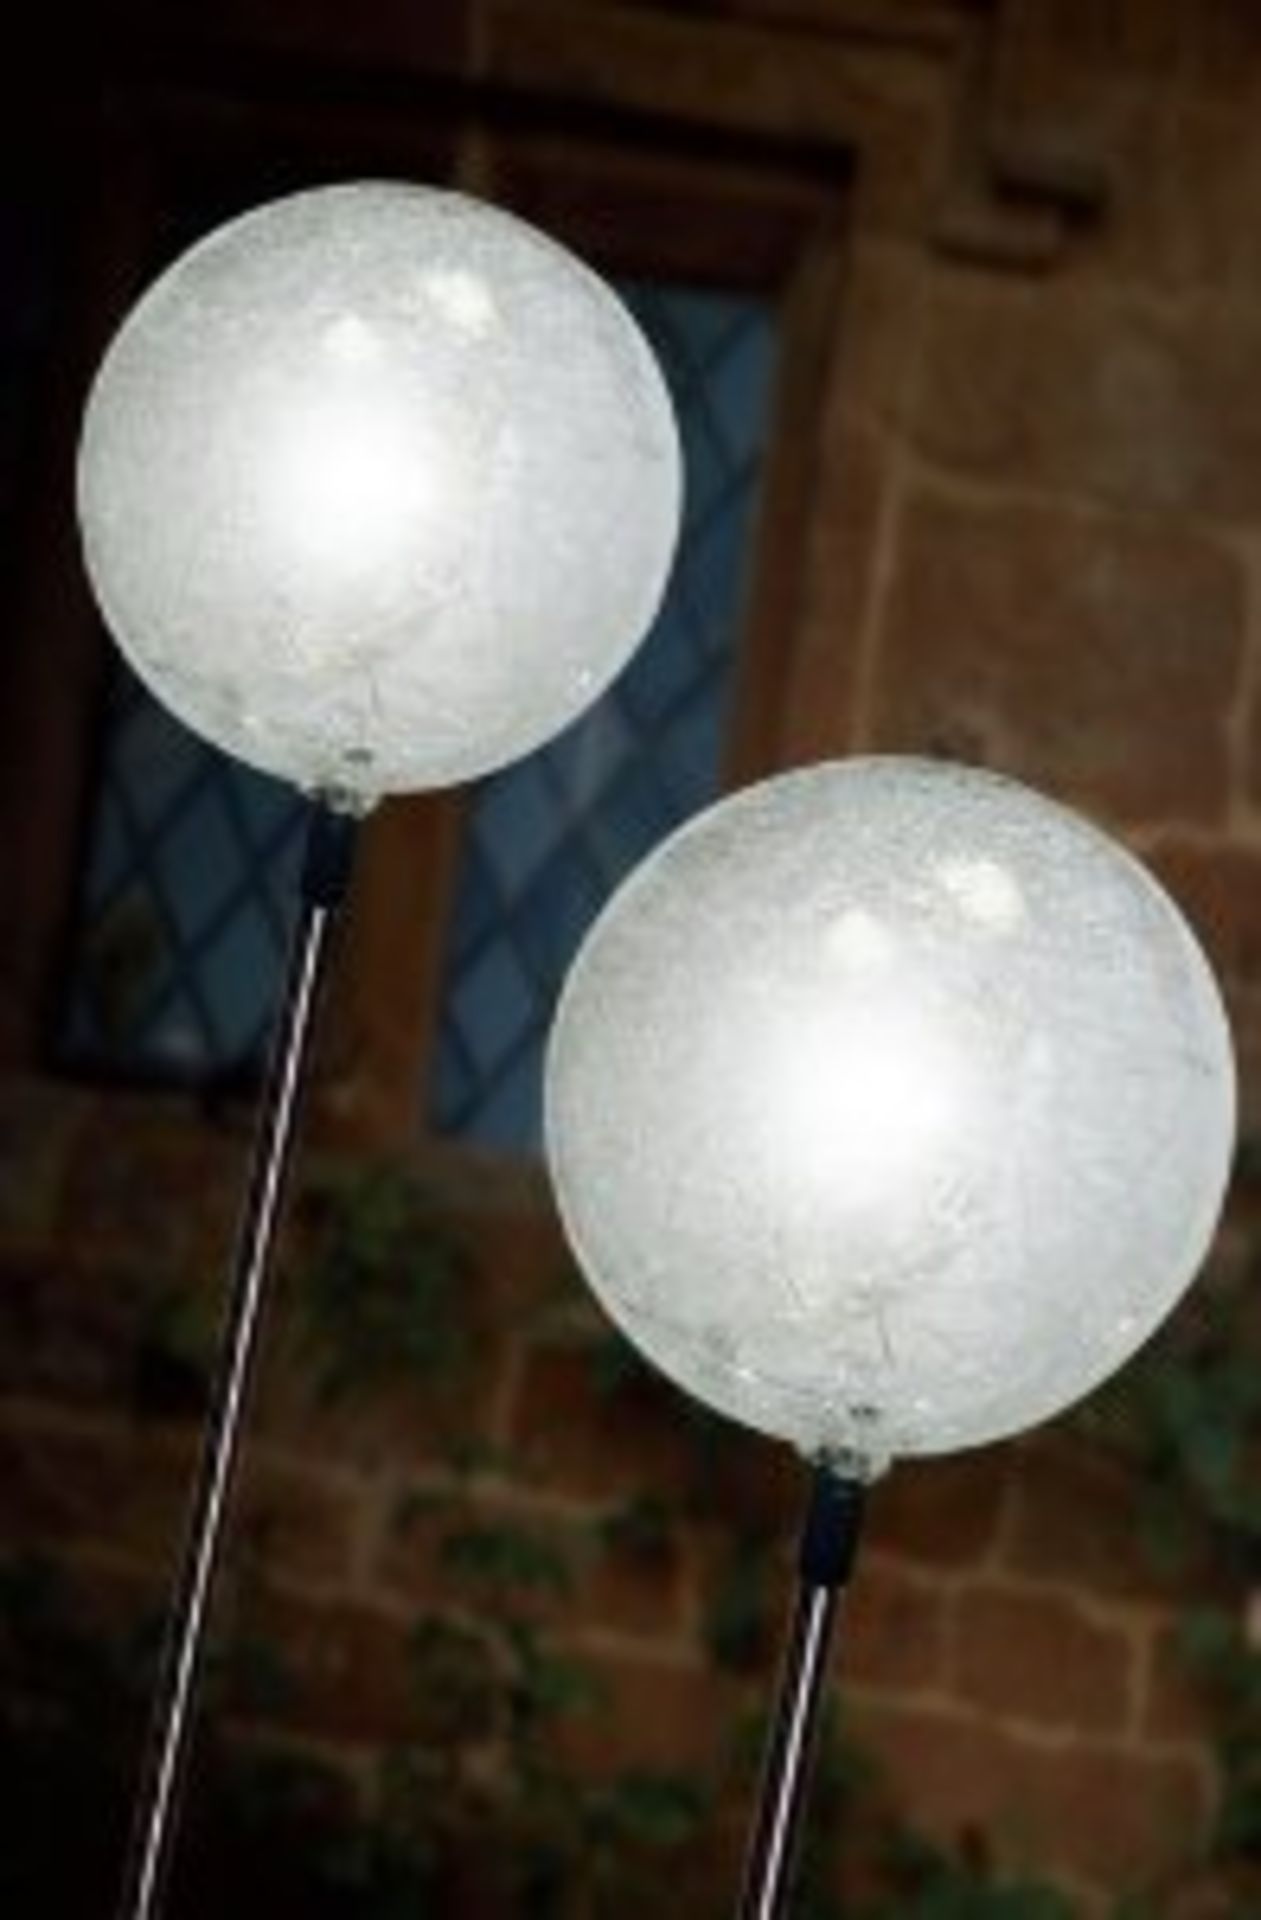 V Brand New Pack of Two Contemporary Globe Solar Lights with Crackled glass design on stainless